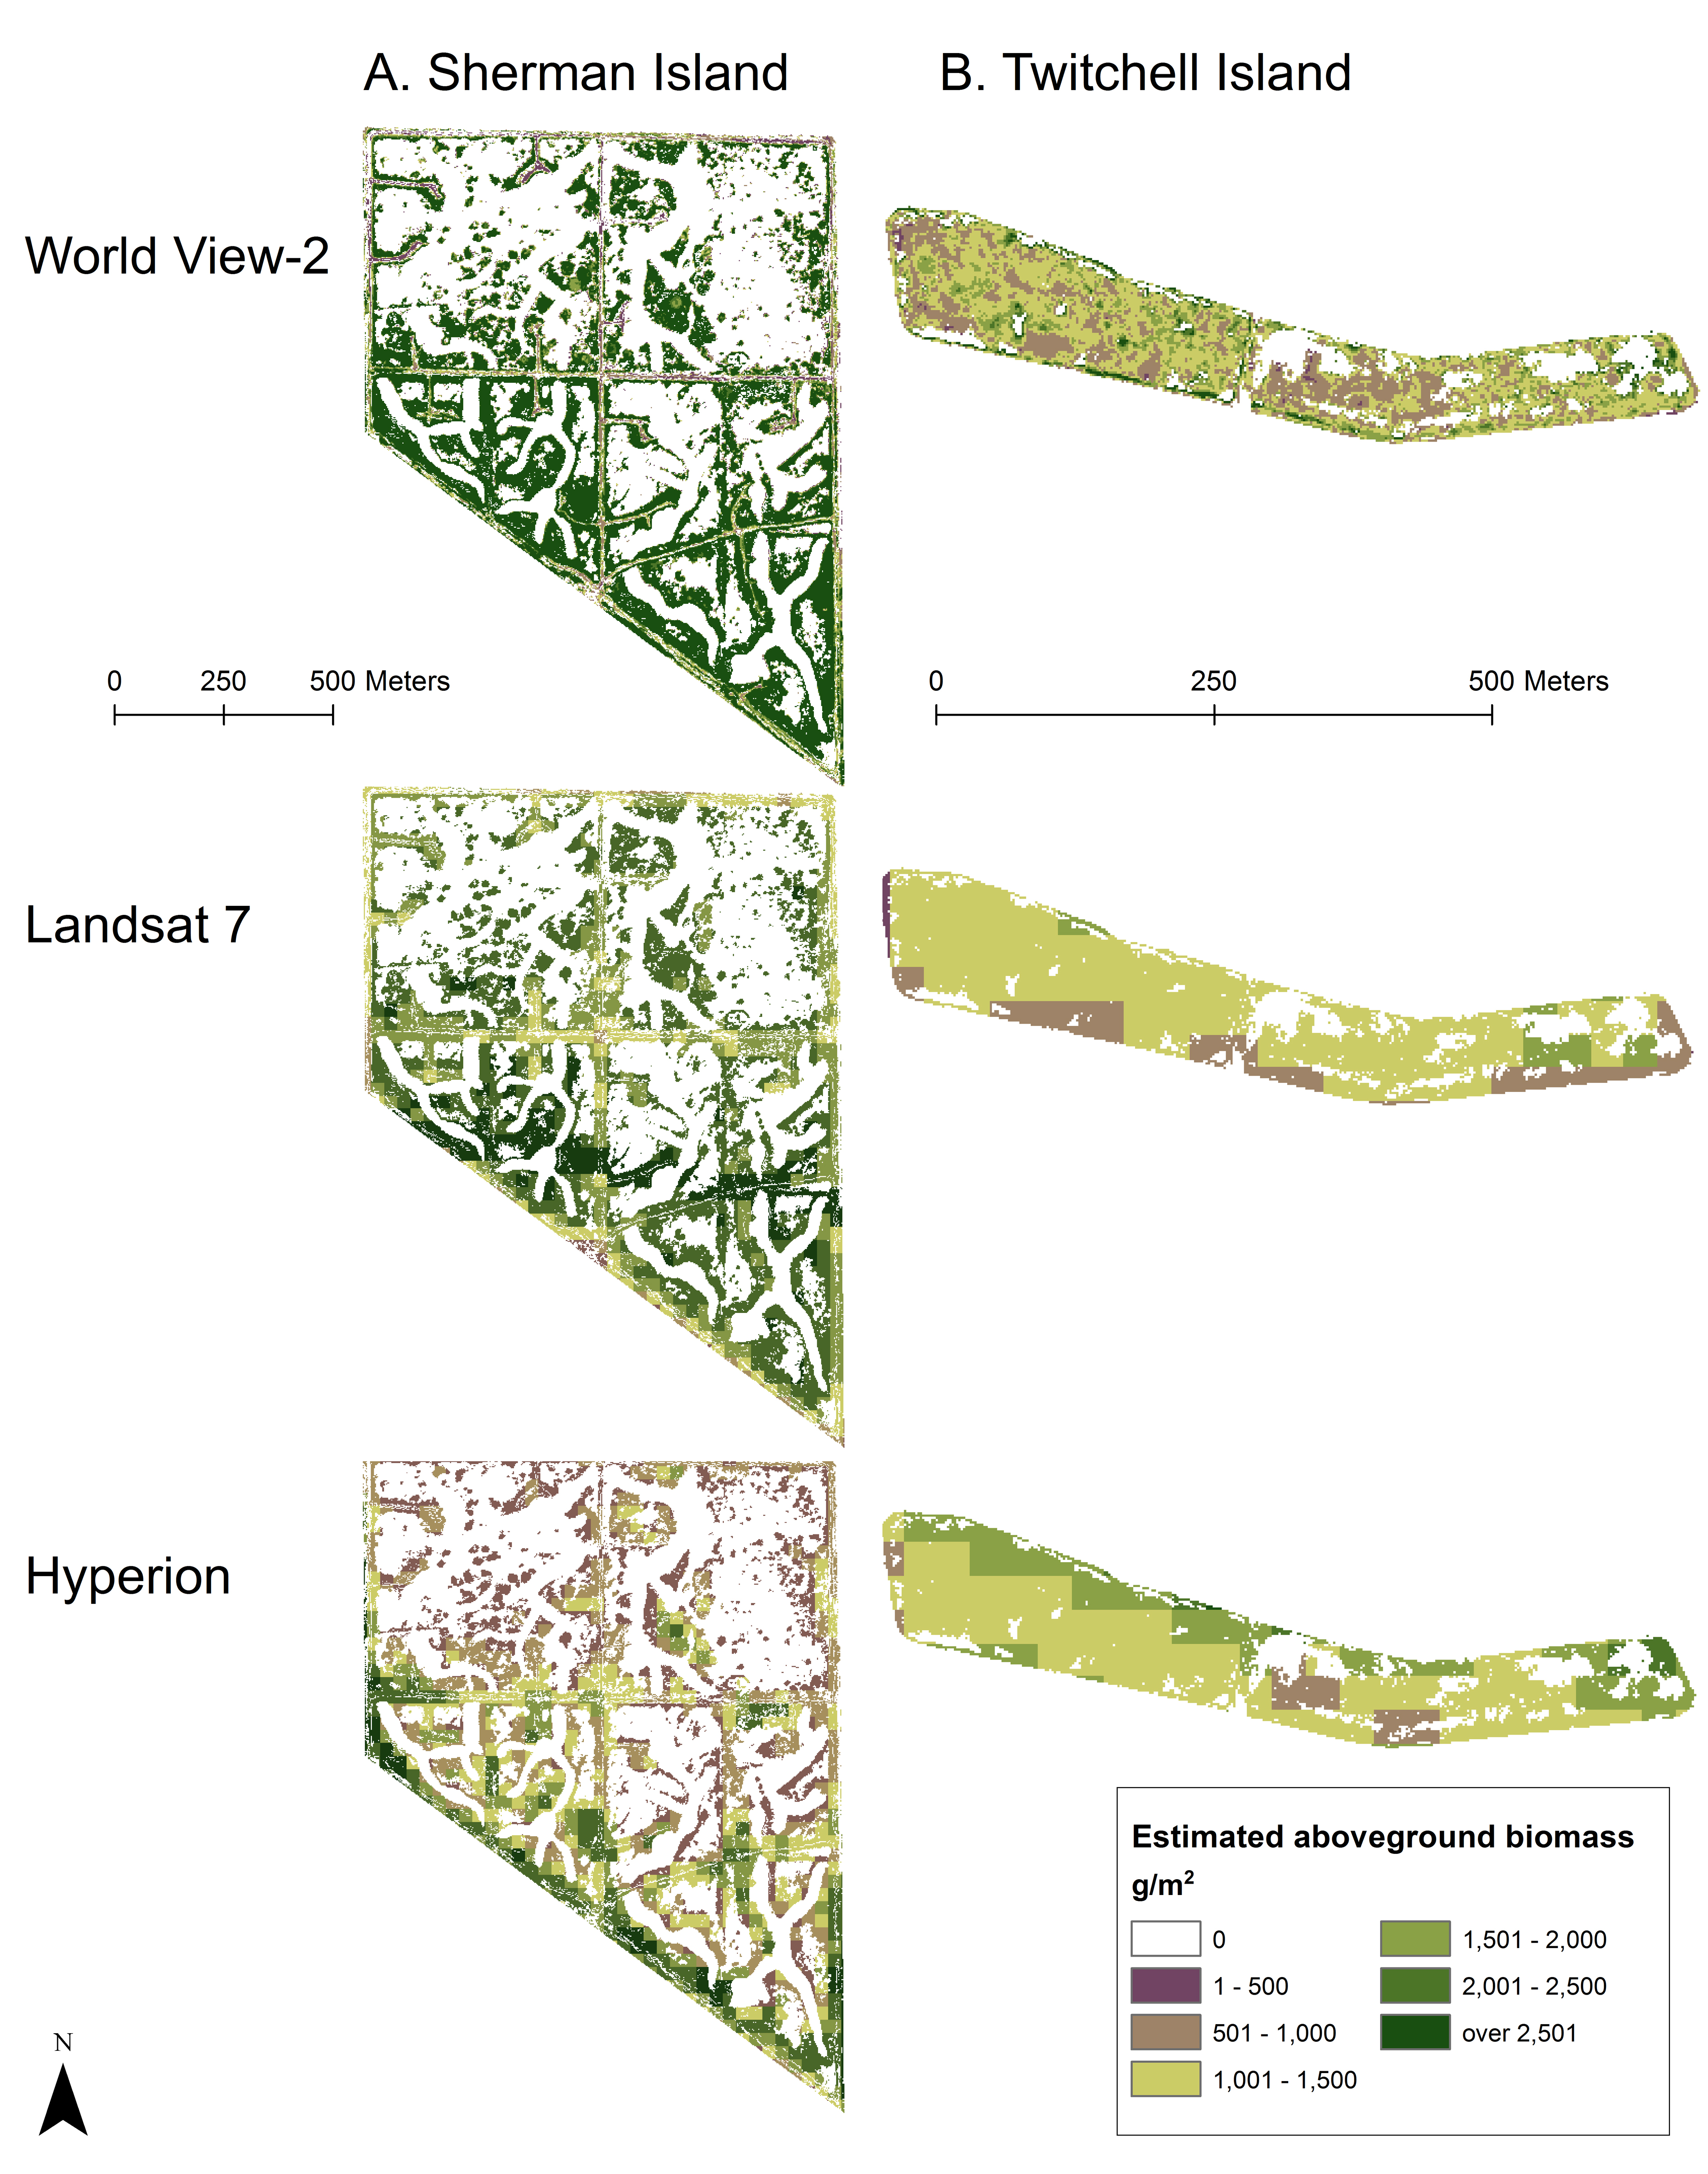 Maps of estimated biomass for late-summer Hyperion, Landsat 7, and WorldView-2 images for a) Sherman Island and b) Twitchell Island. Biomass was mapped for pixels classified as emergent marsh vegetation (Typha spp. and/or S. acutus) or plant litter.